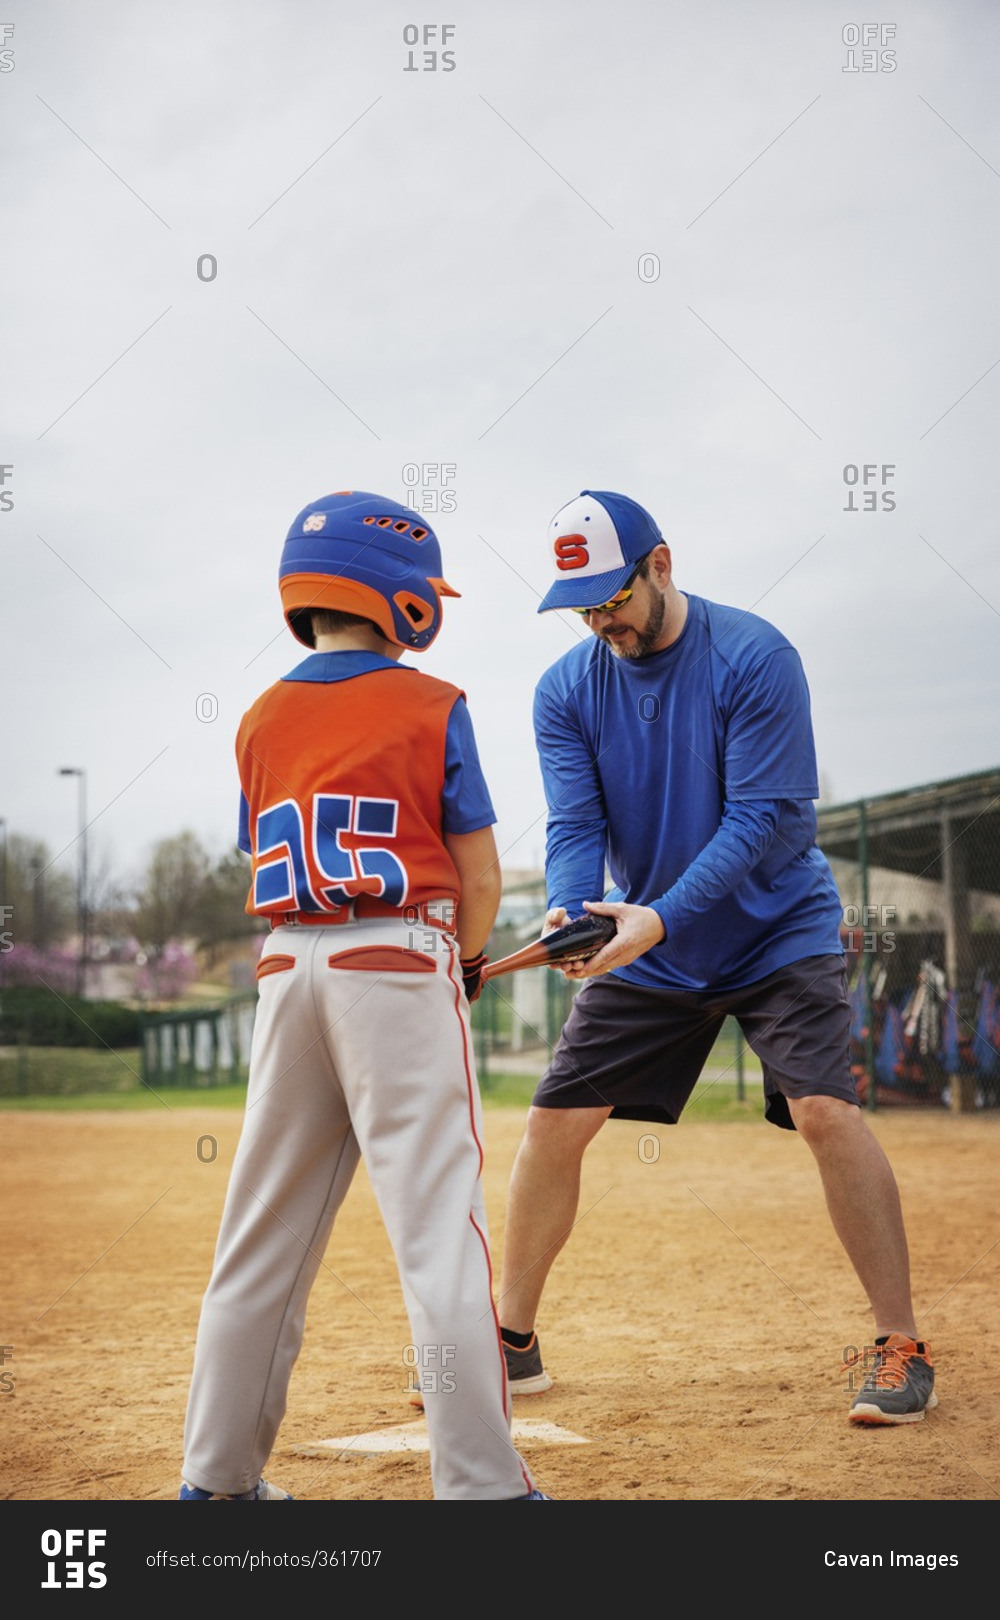 Coach assisting boy in playing baseball on field